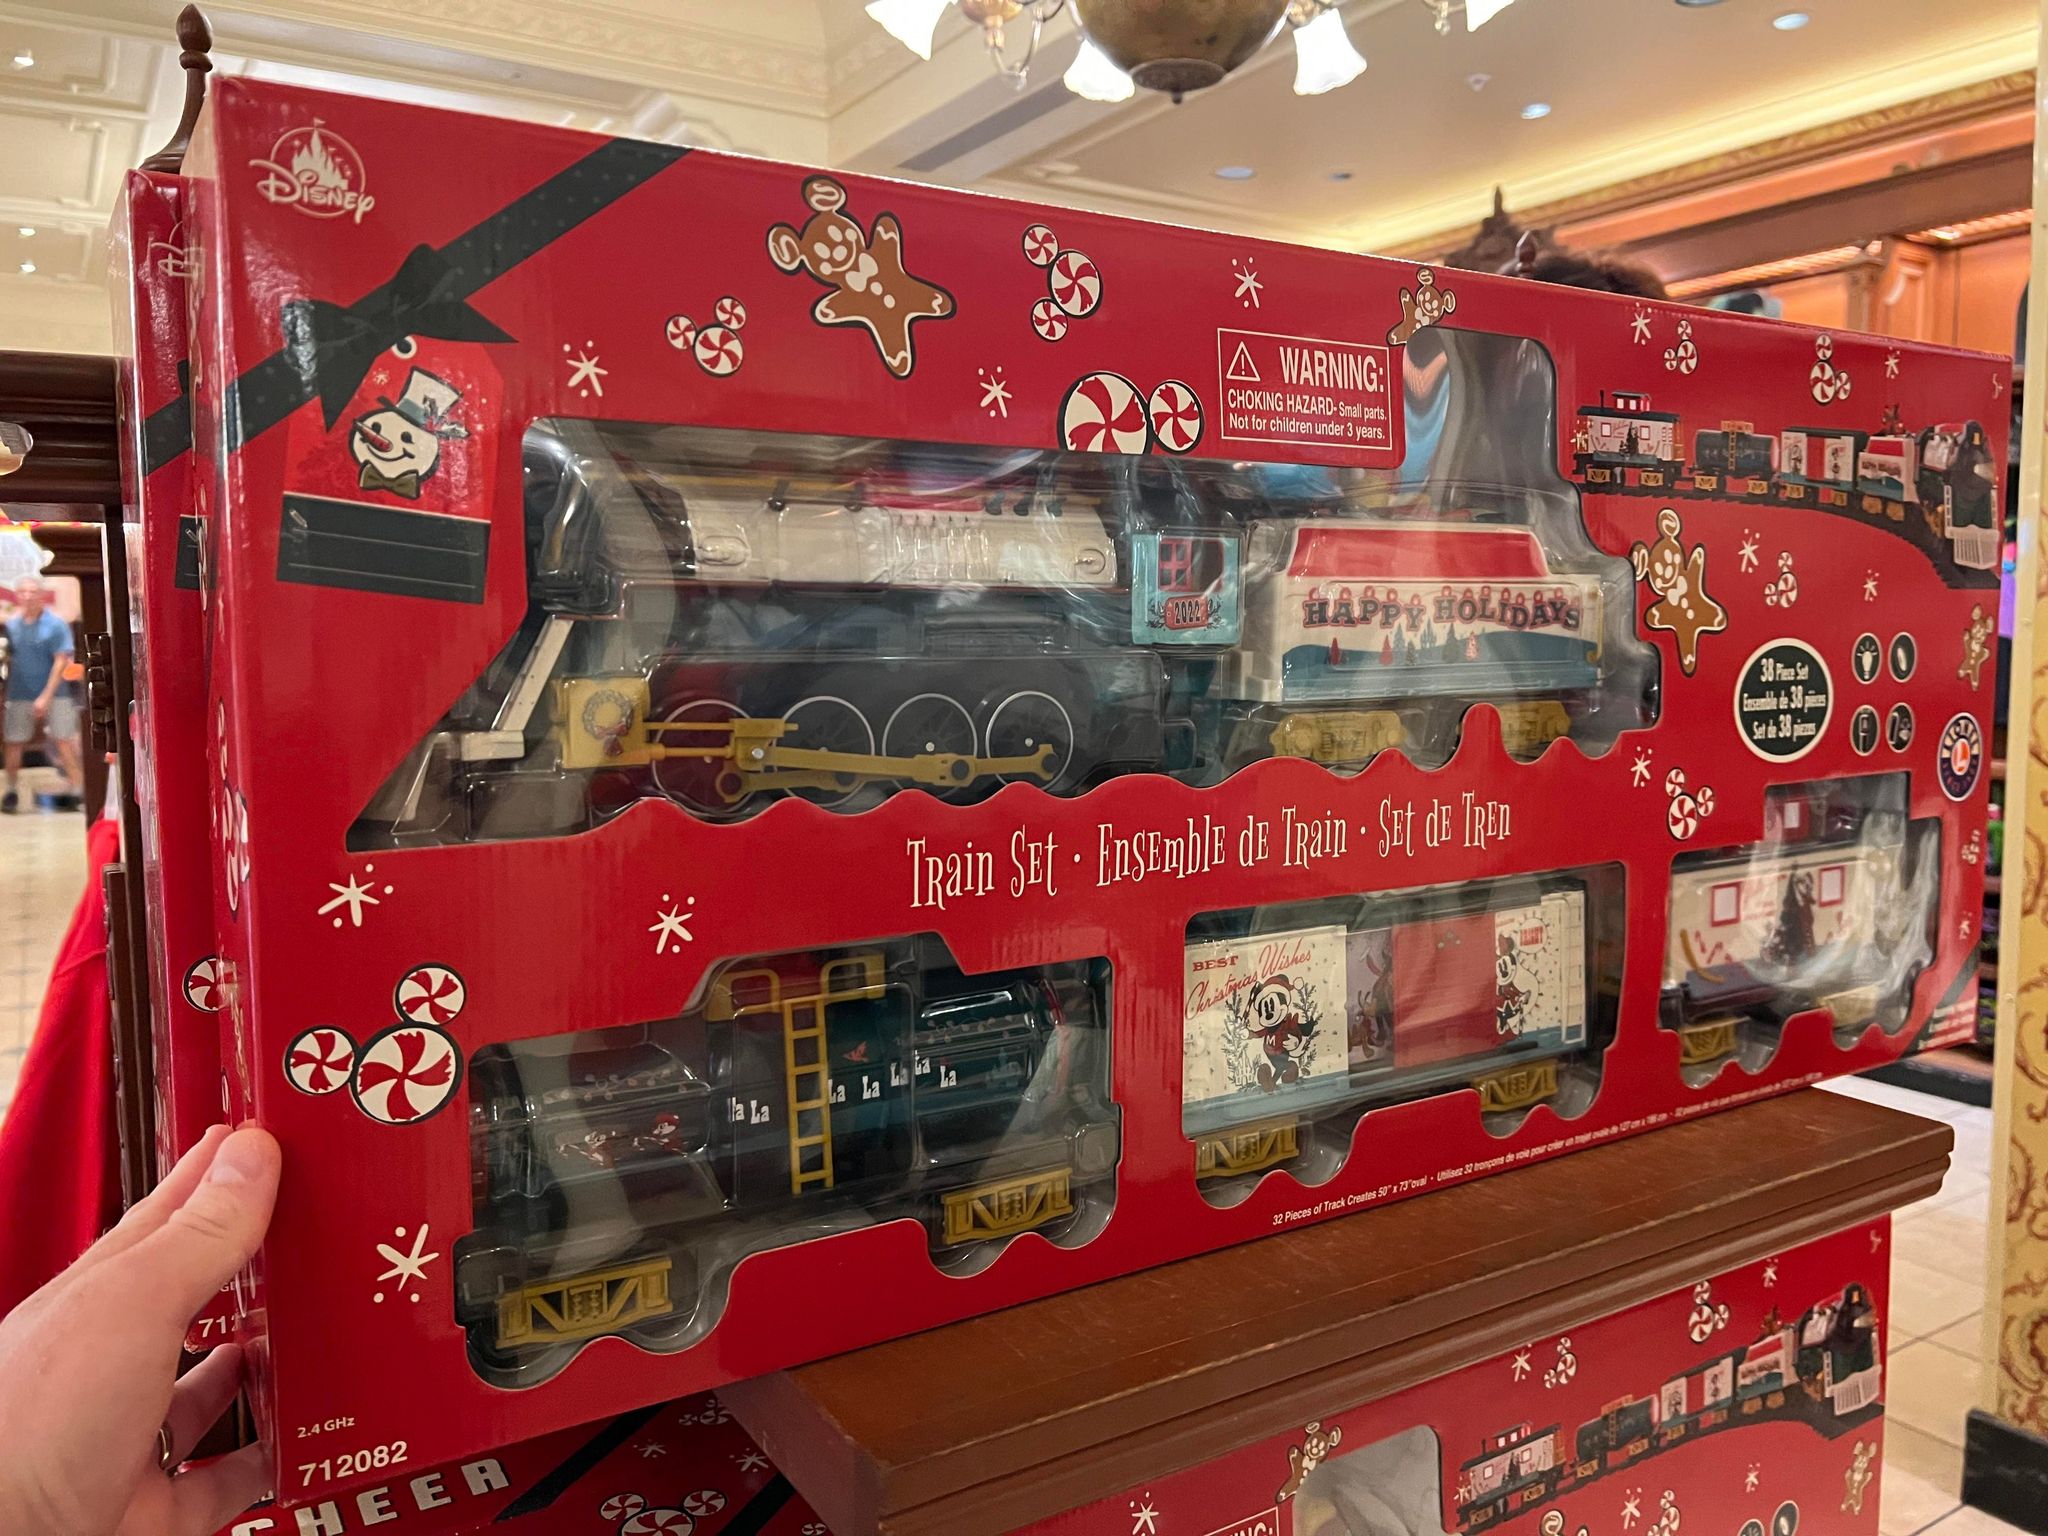 This New Disney Christmas Train Set is the Gift of Your Dreams - MickeyBlog.com